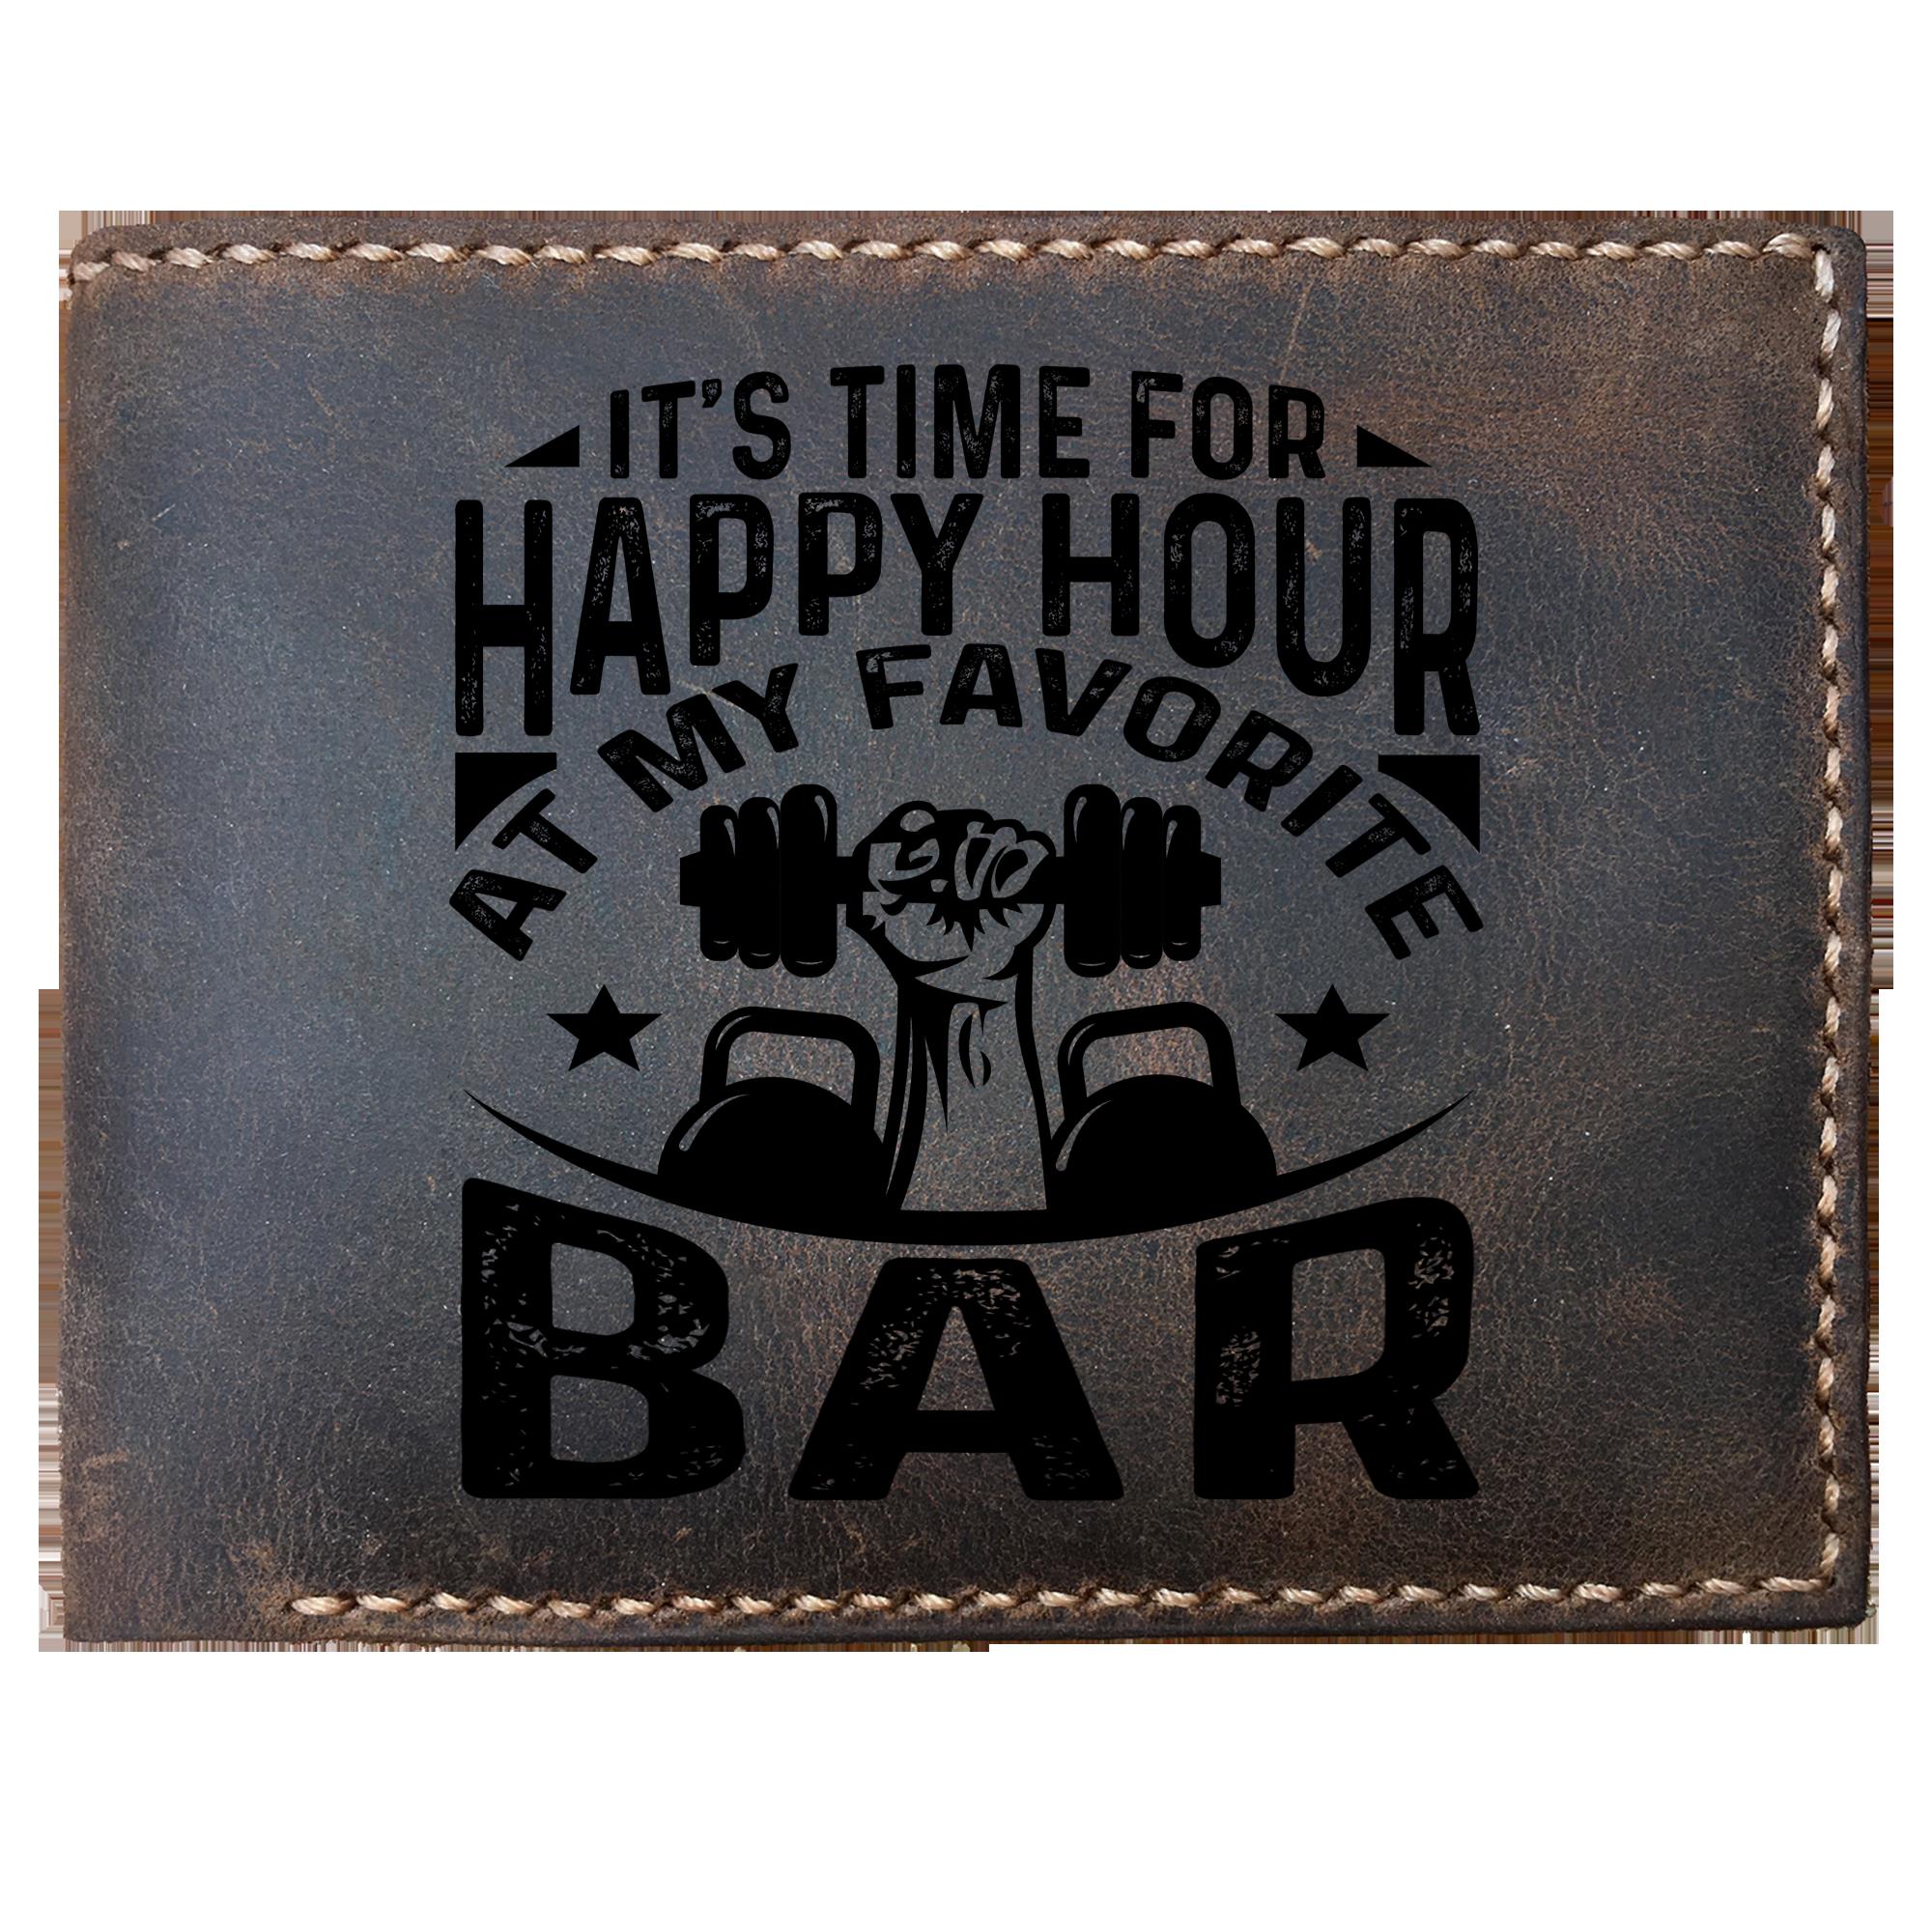 Skitongifts Funny Custom Laser Engraved Bifold Leather Wallet For Men, Time For Happy Hour At My Favorite Bar Powerlifting Funny